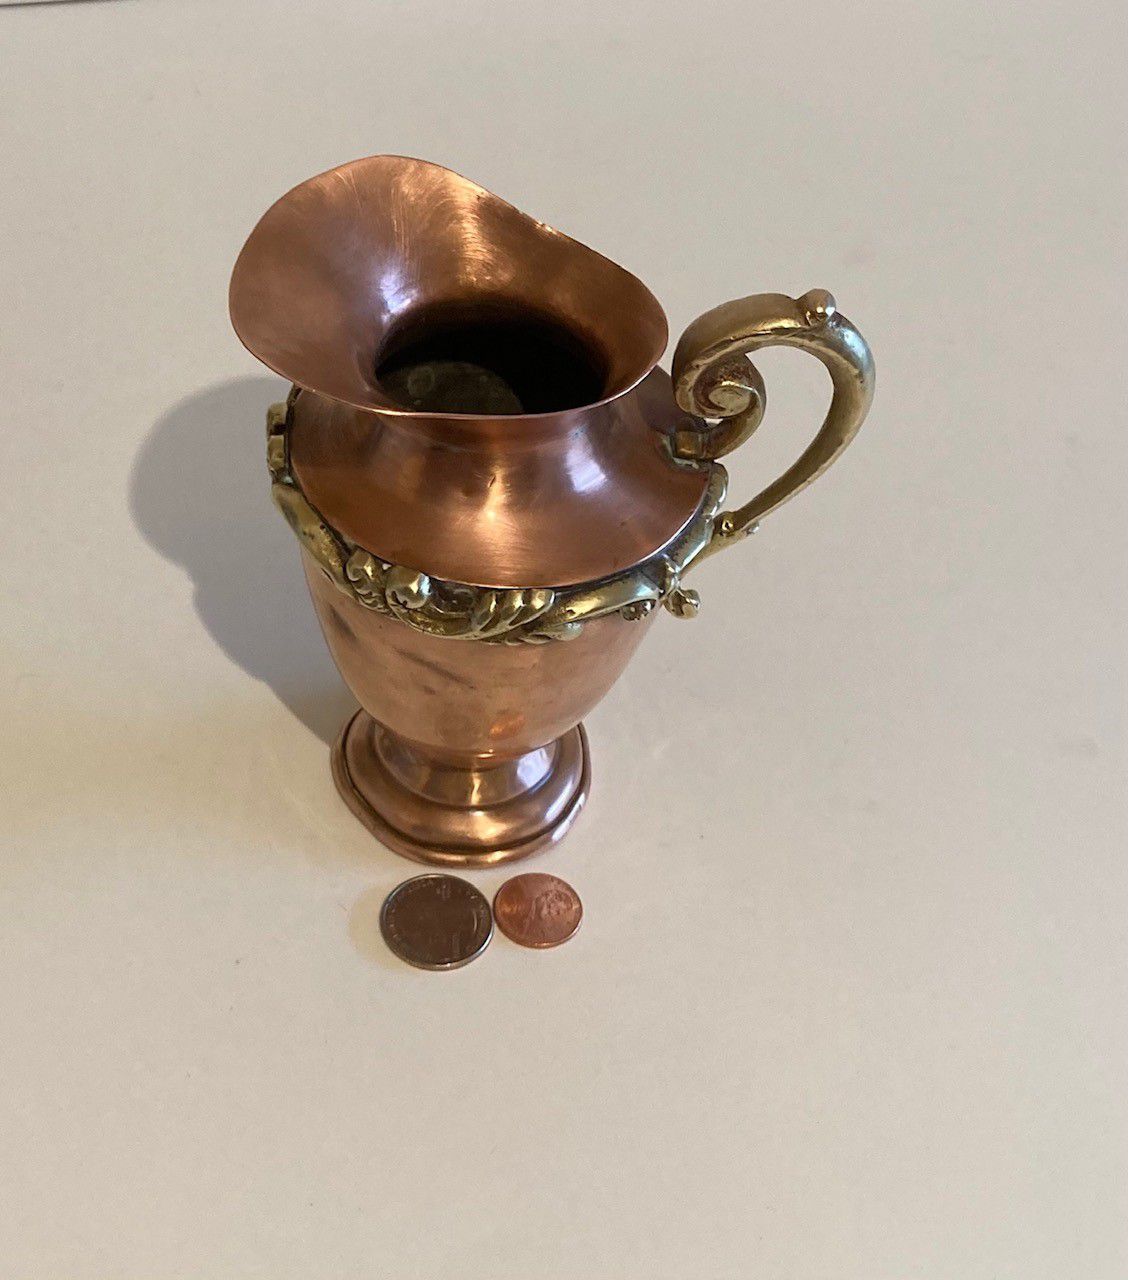 Vintage Copper and Brass Metal Serving Pitcher, 5 1/2" Miniature Picture, Heavy Duty Brass Handle and Trim, Kitchen Decor, Home Decor, Shelf Display